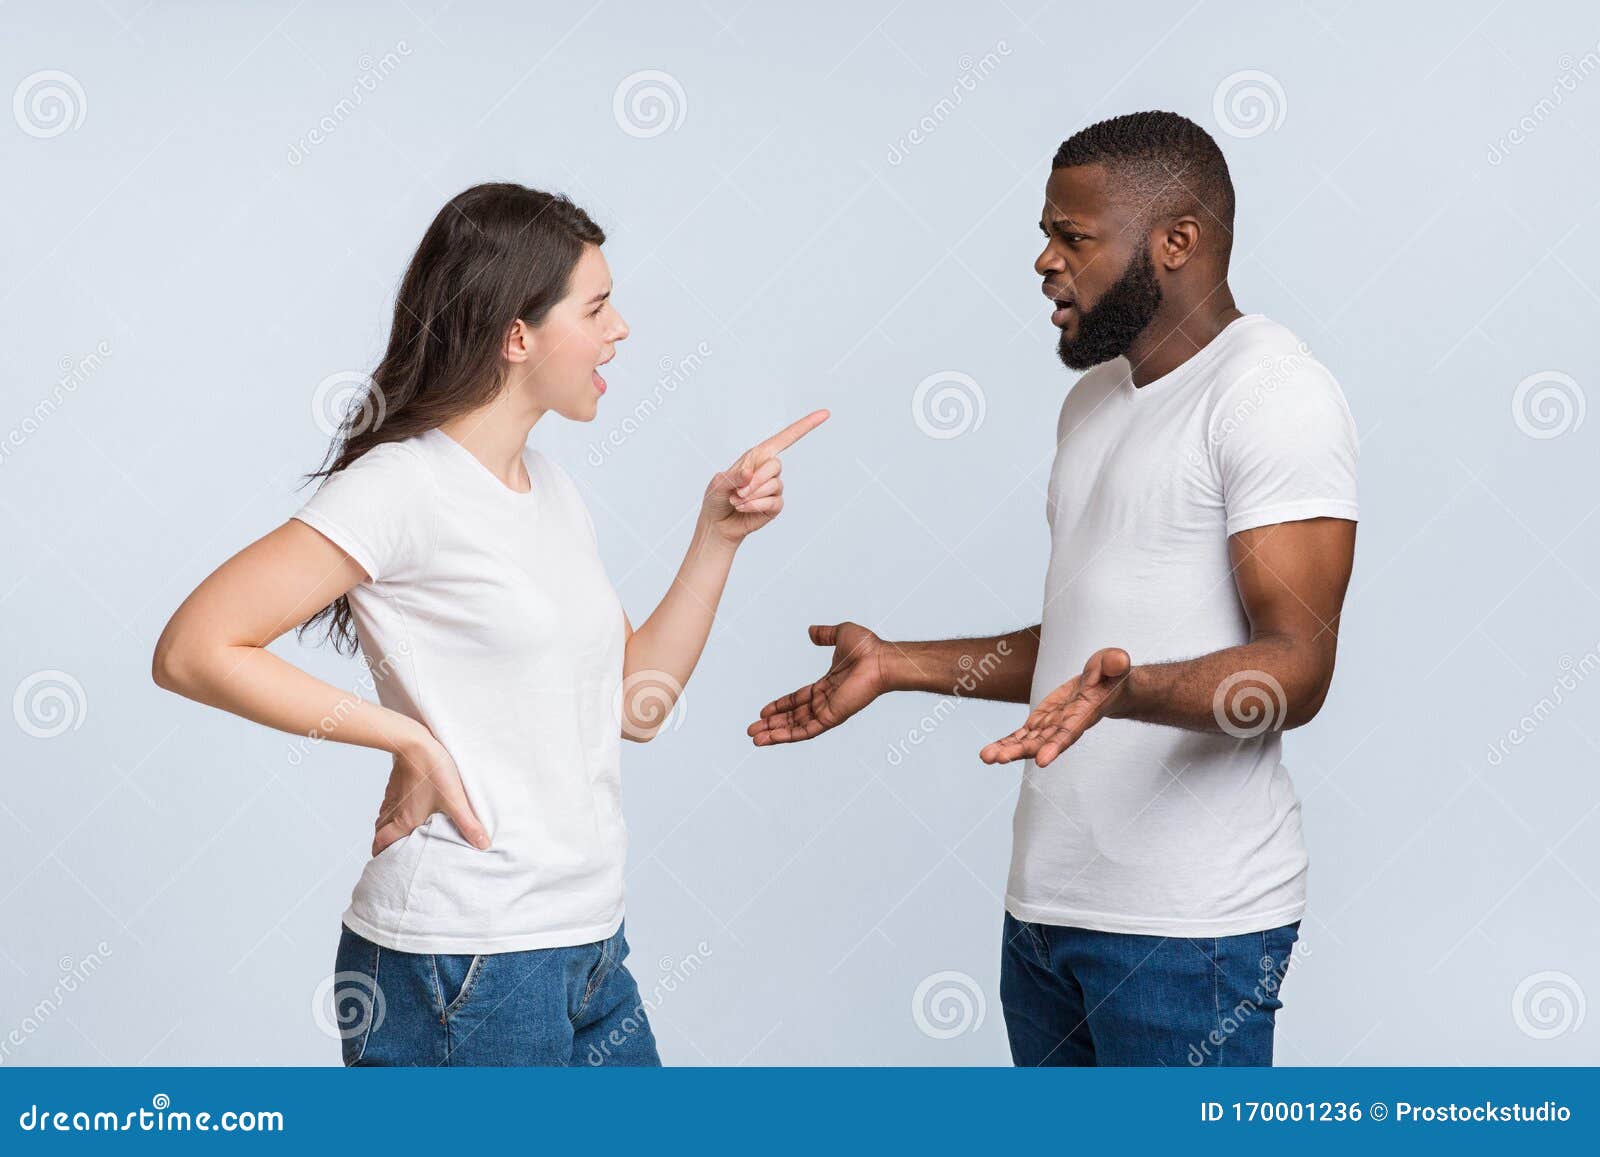 Interracial Couple Arguing, Angry Young Woman Blaming Her Afro ... image